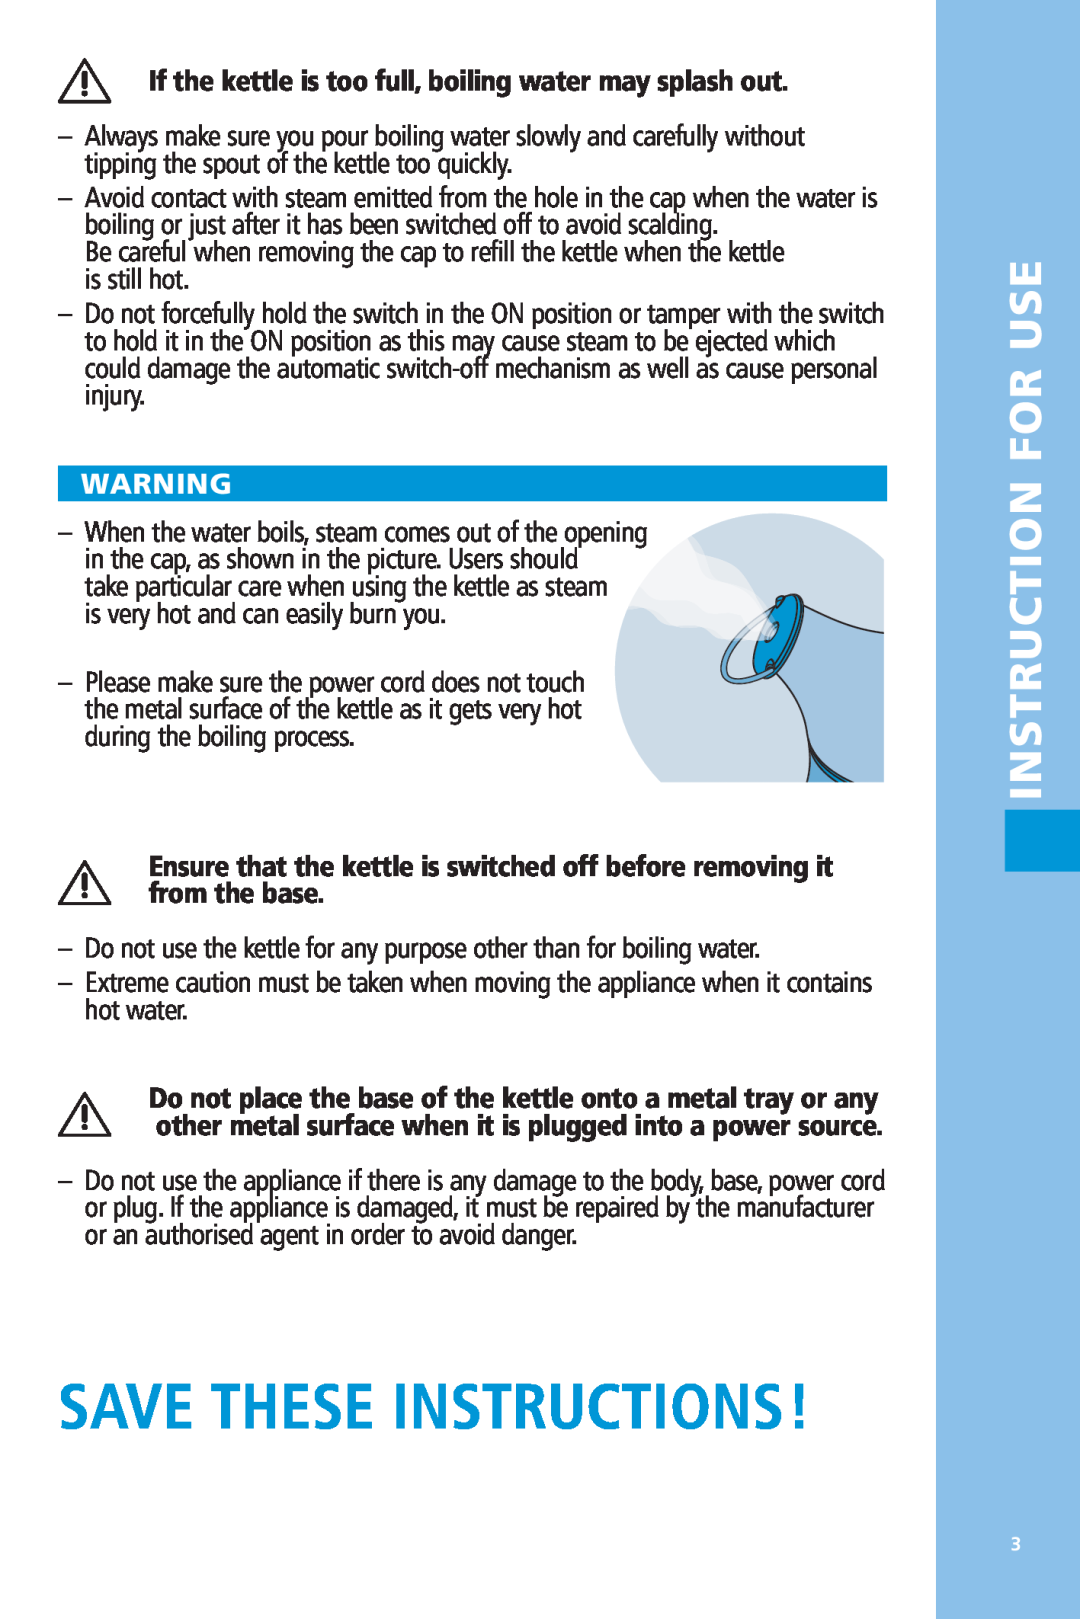 Bodum 5057 manual Save These Instructions, Instruction For Use, If the kettle is too full, boiling water may splash out 